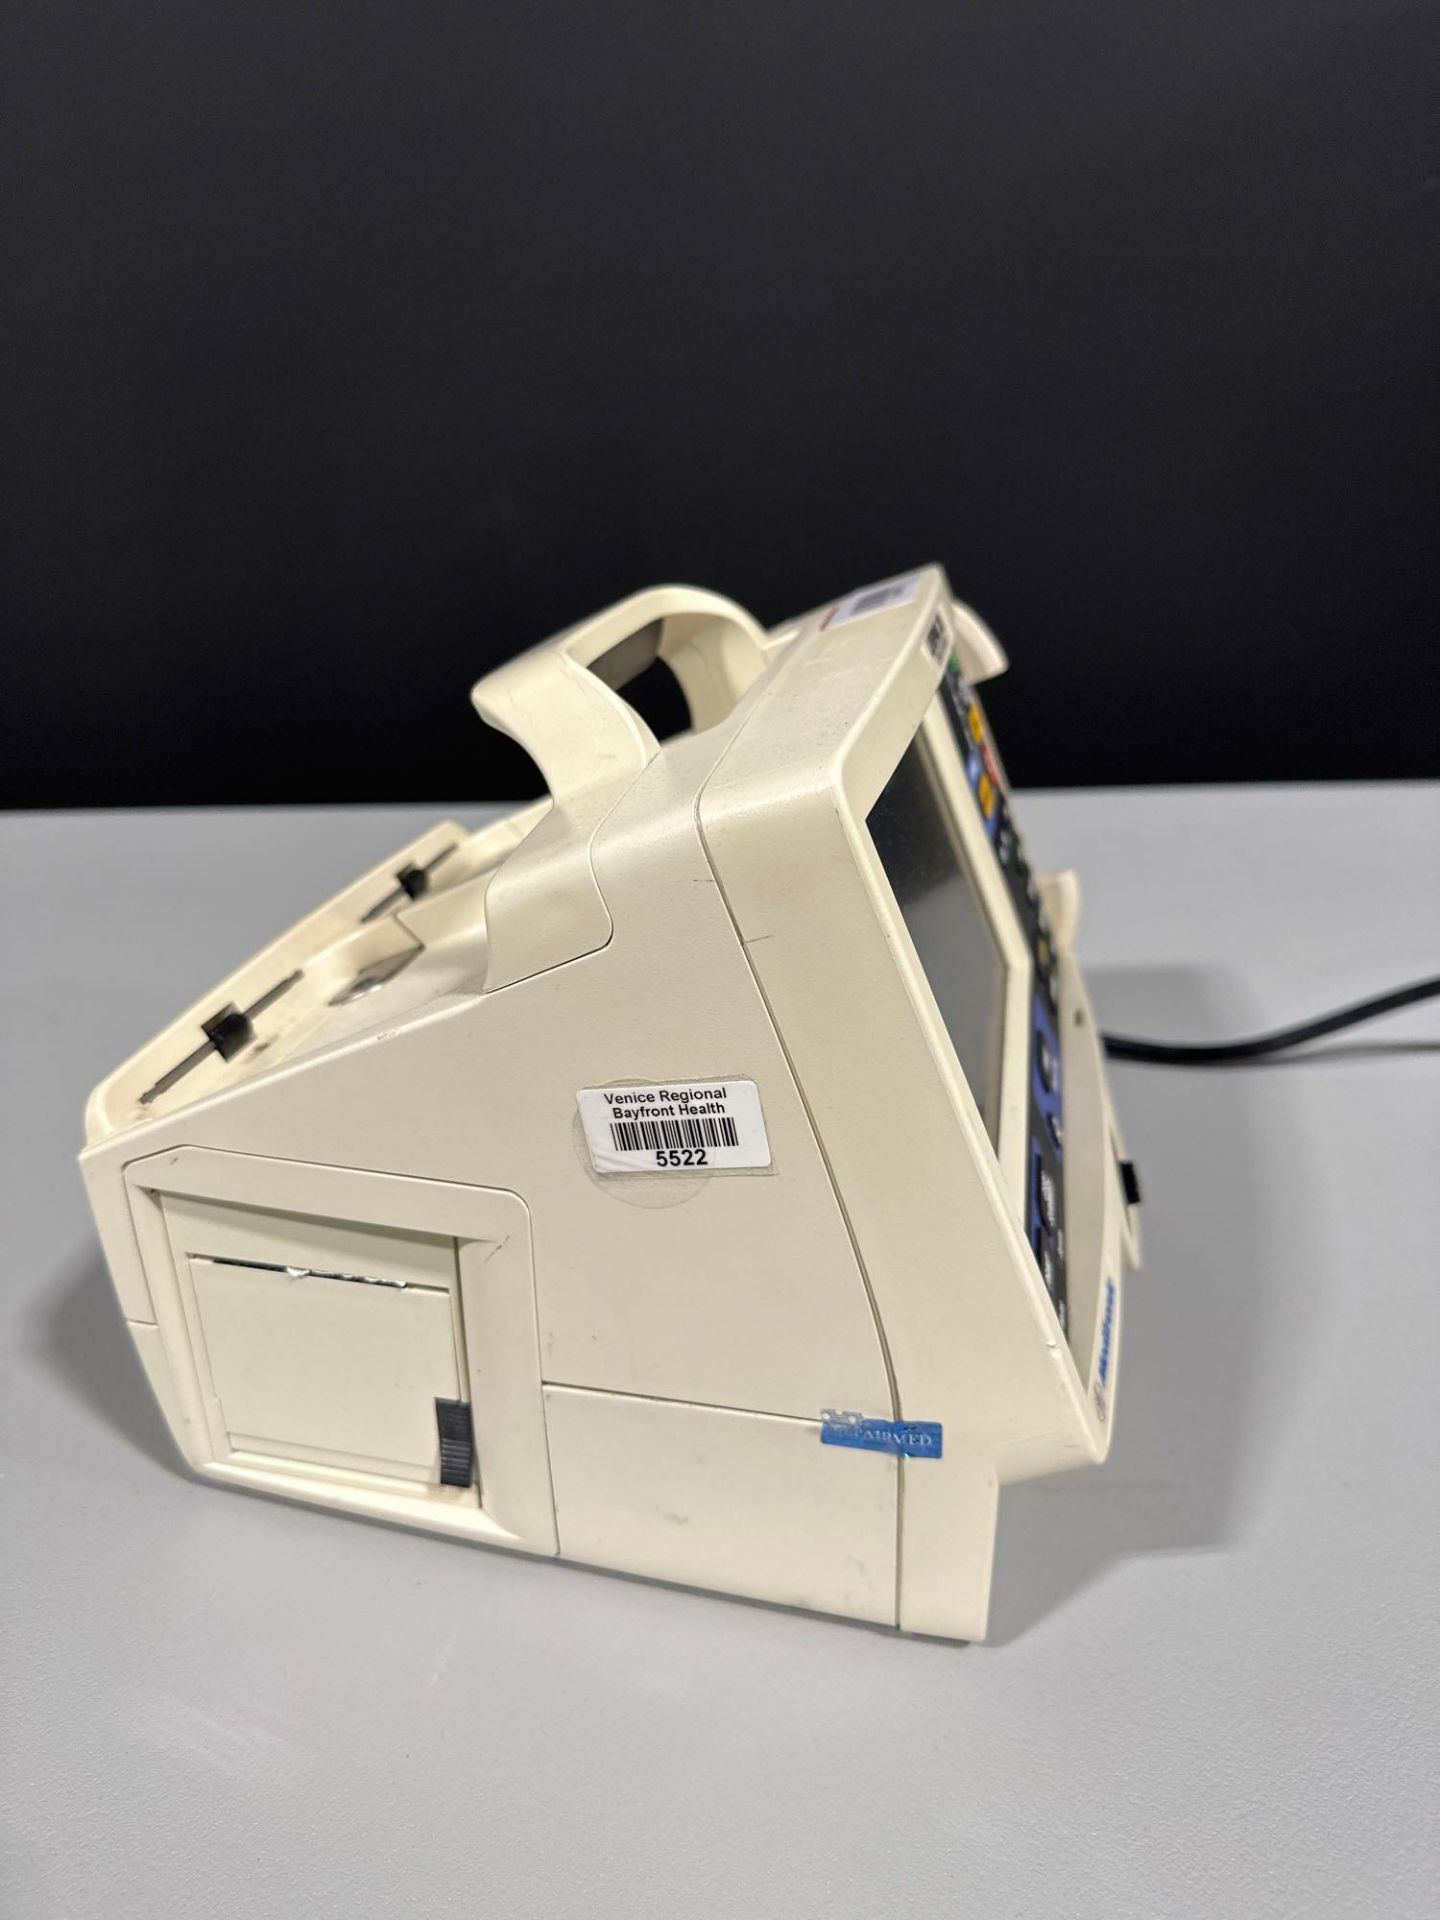 MEDTRONIC/PHYSIO CONTROL LIFEPAK 20 DEFIB WITH PACING, 3 LEAD ECG, ANALYZE (AED MODE) - Image 6 of 8